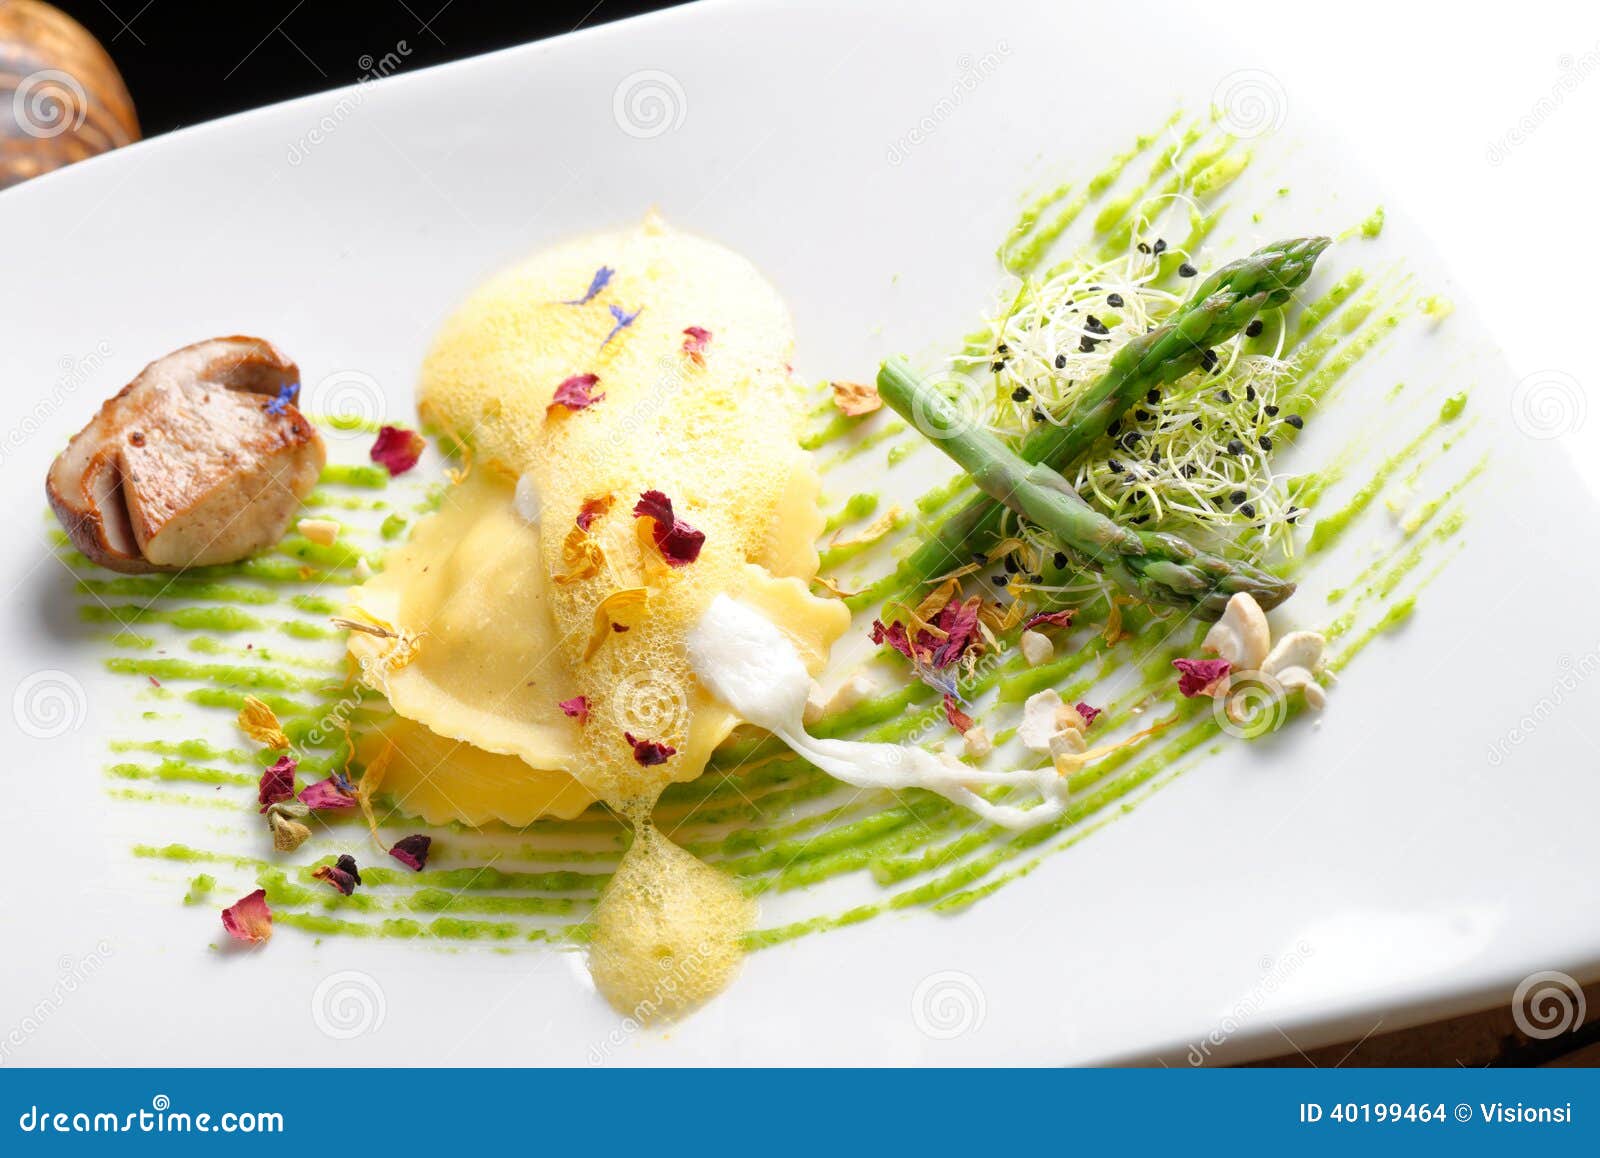 fine dining, ravioli with asparagus and porcini